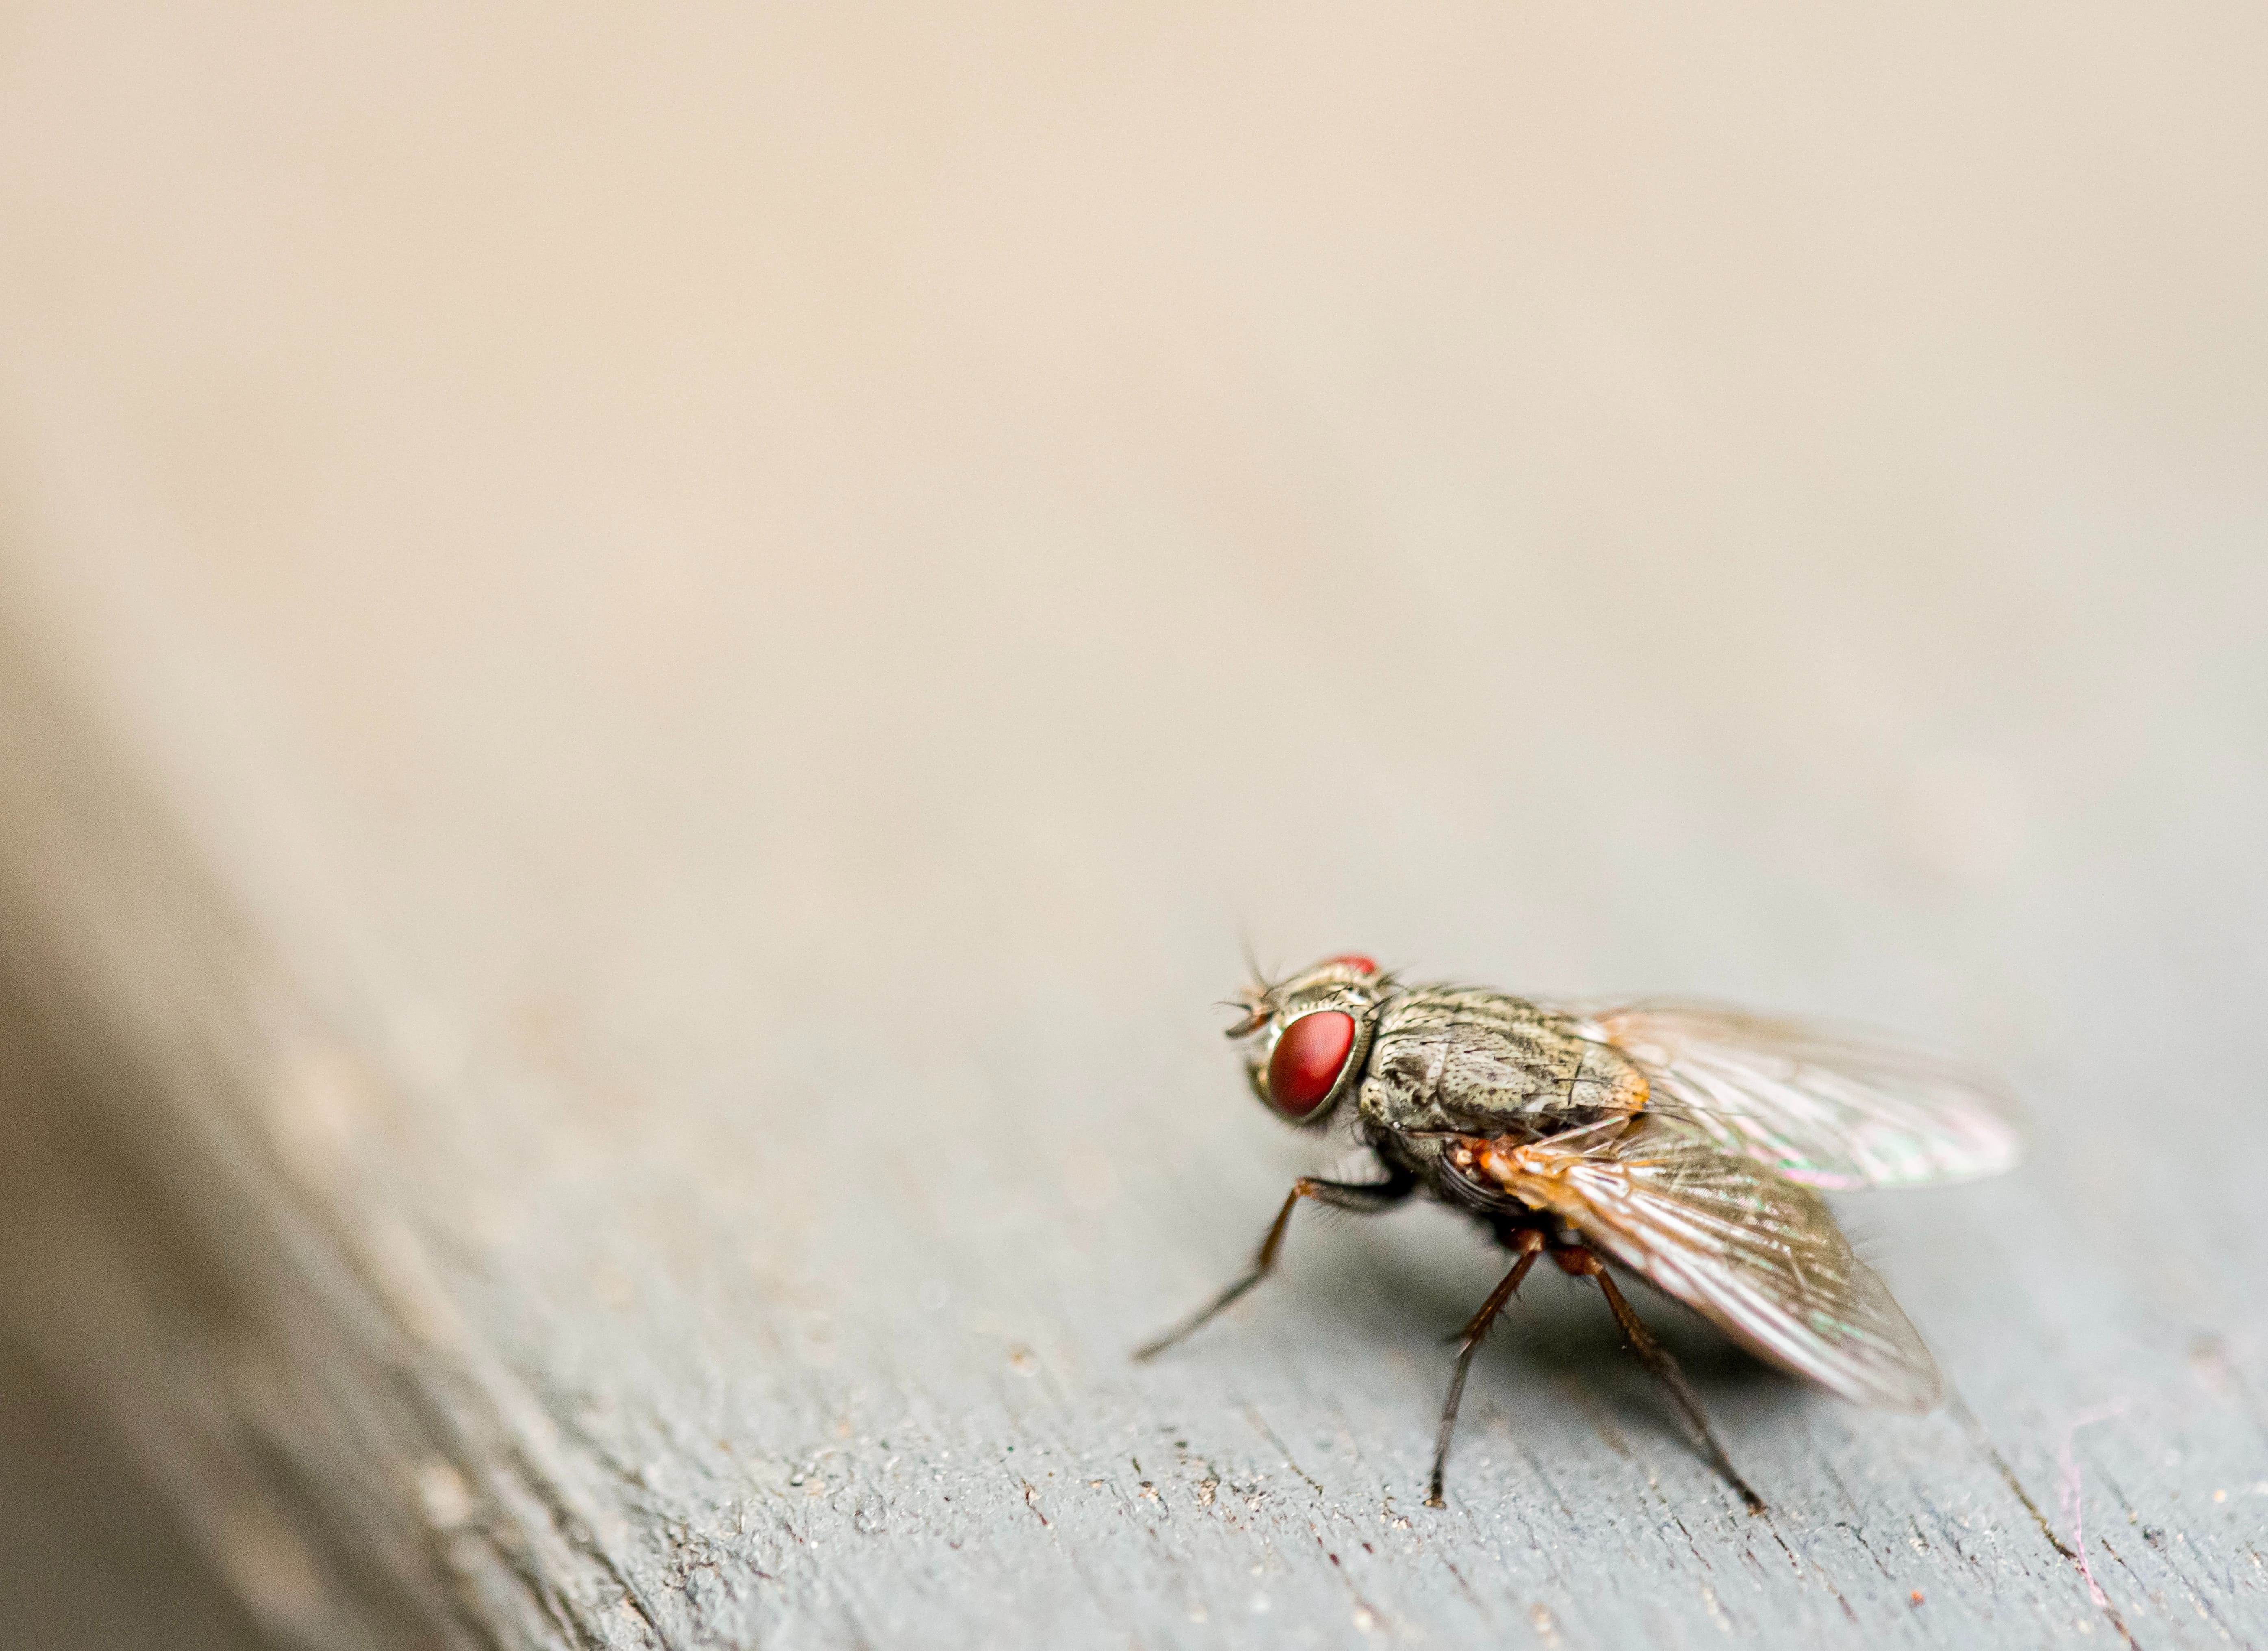 How To Get Rid Of Cluster Flies